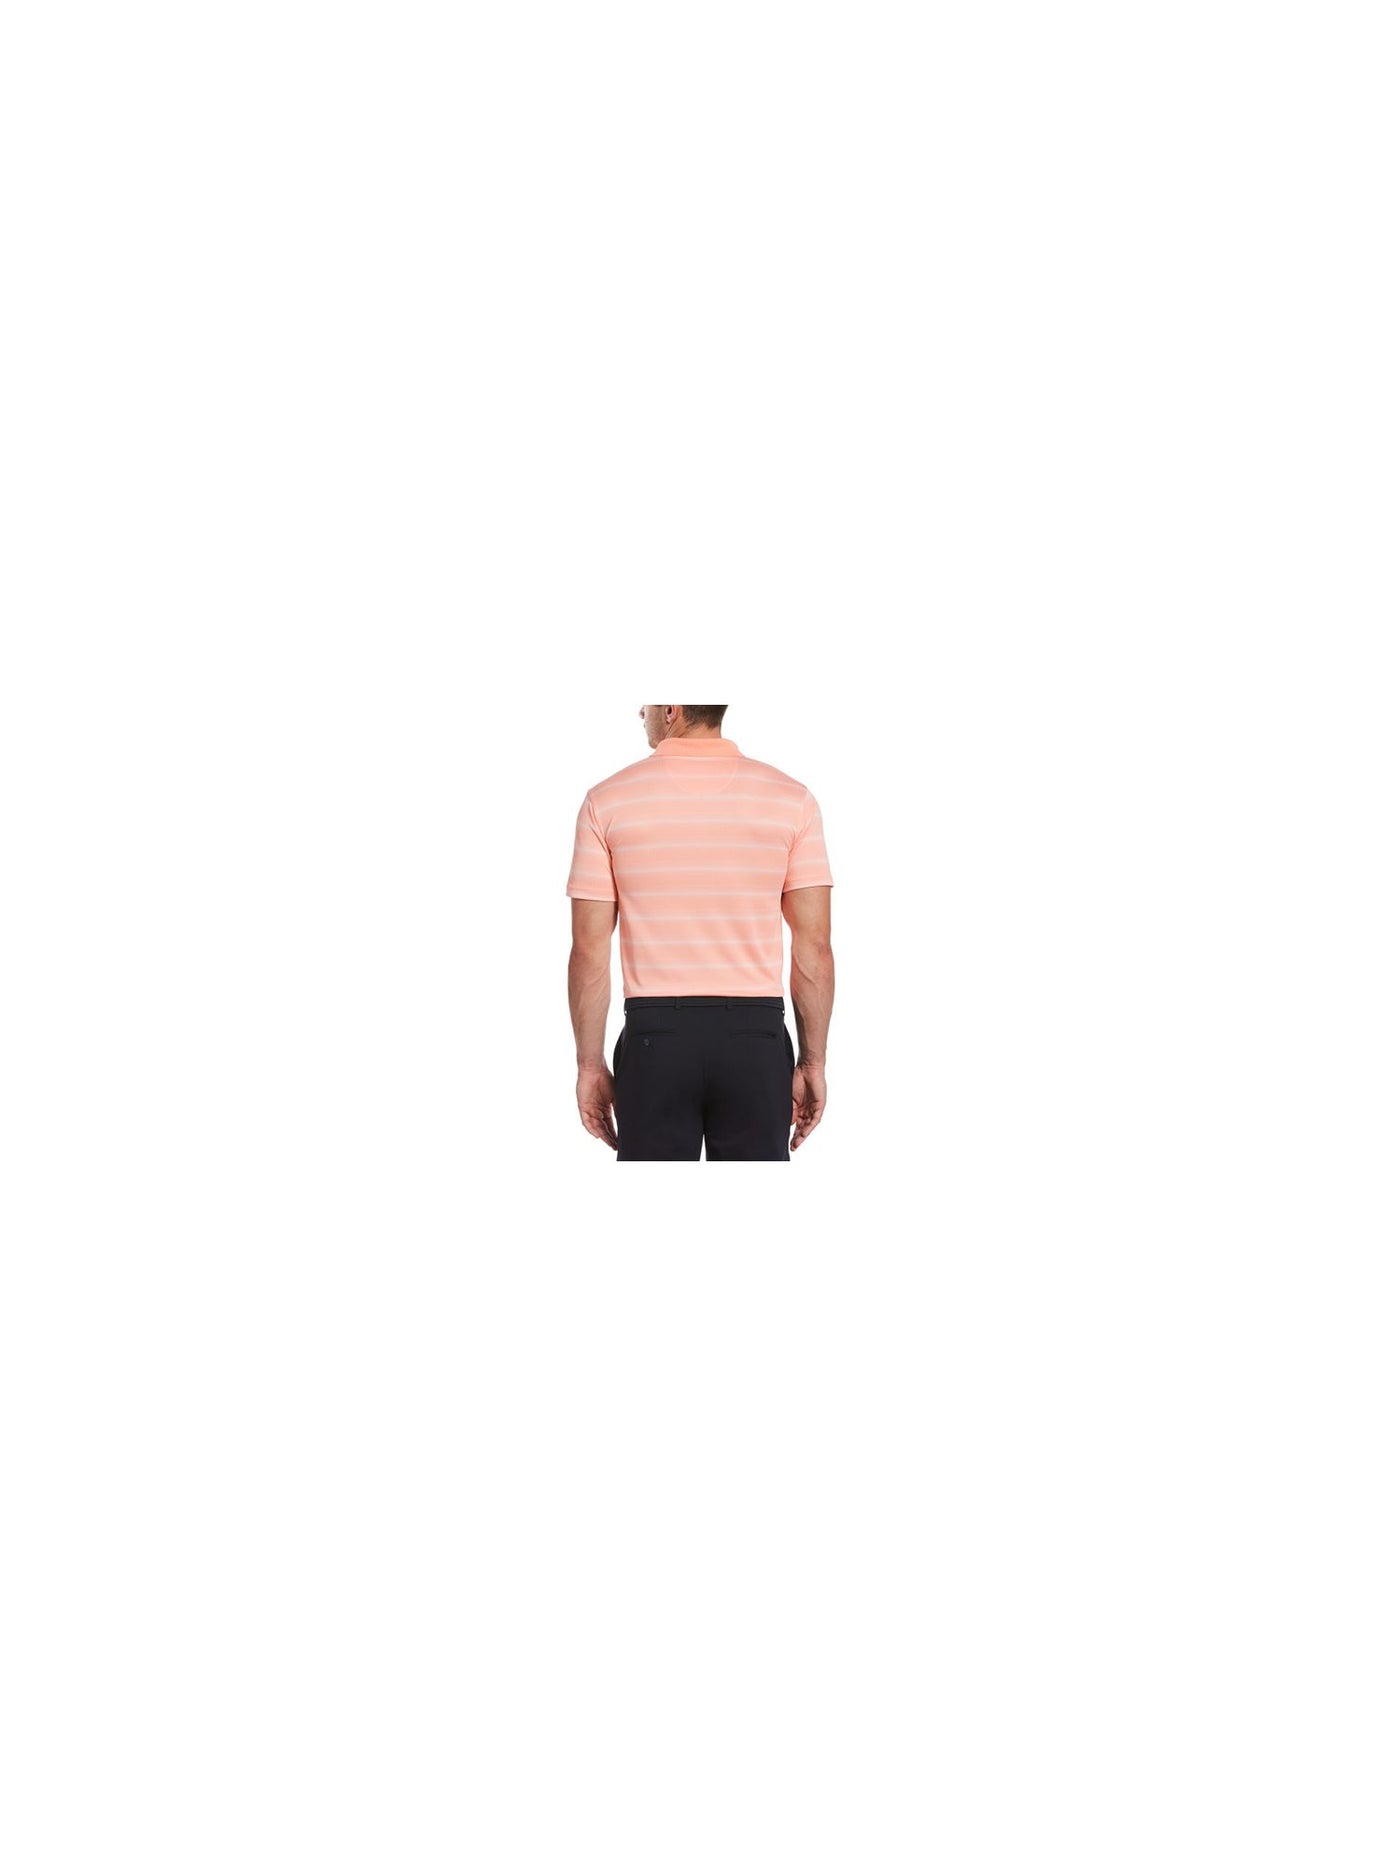 HYBRID APPAREL Mens Coral Striped Short Sleeve Moisture Wicking Polo S